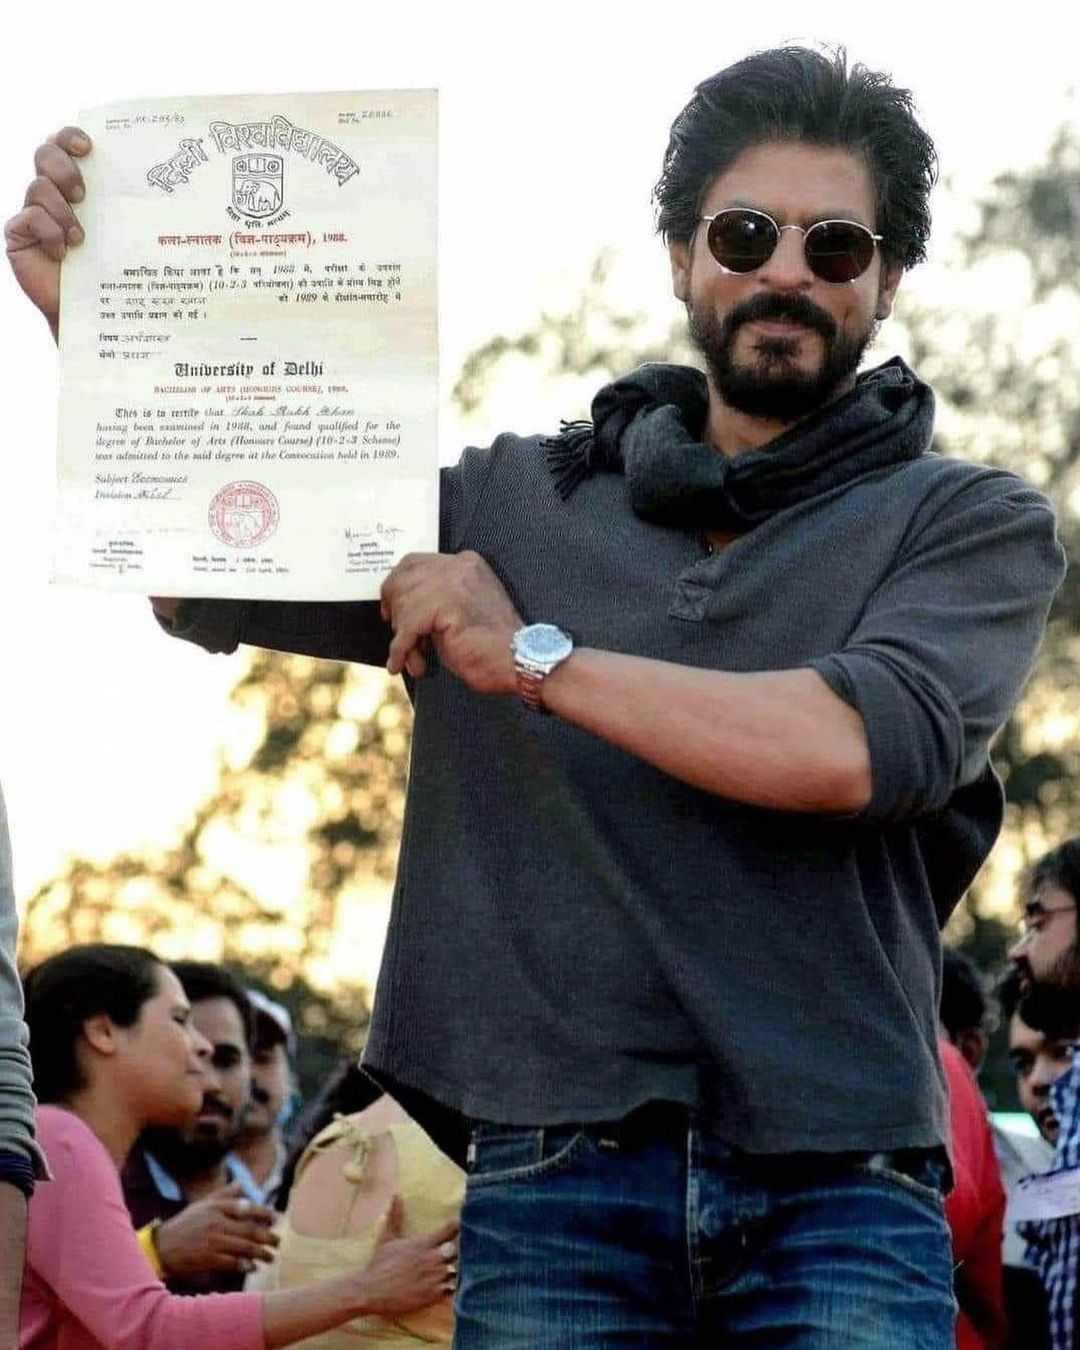 shah rukh khan with his college degree